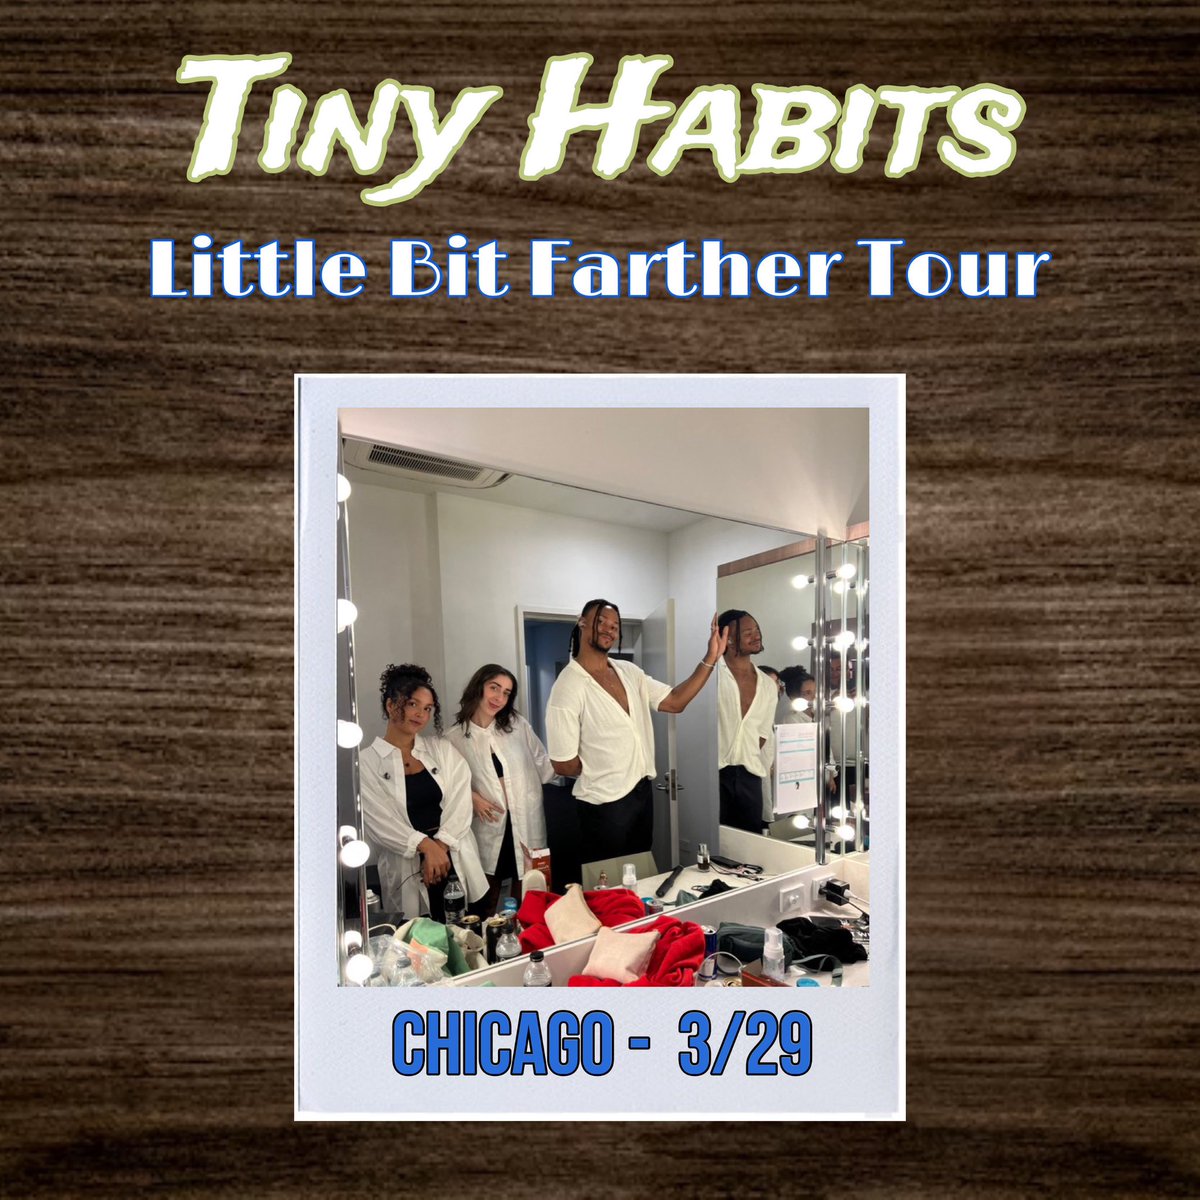 Tonight Tiny Habits will be performing in Chicago!!!!

#TinyHabits #LittleBitFartherTour